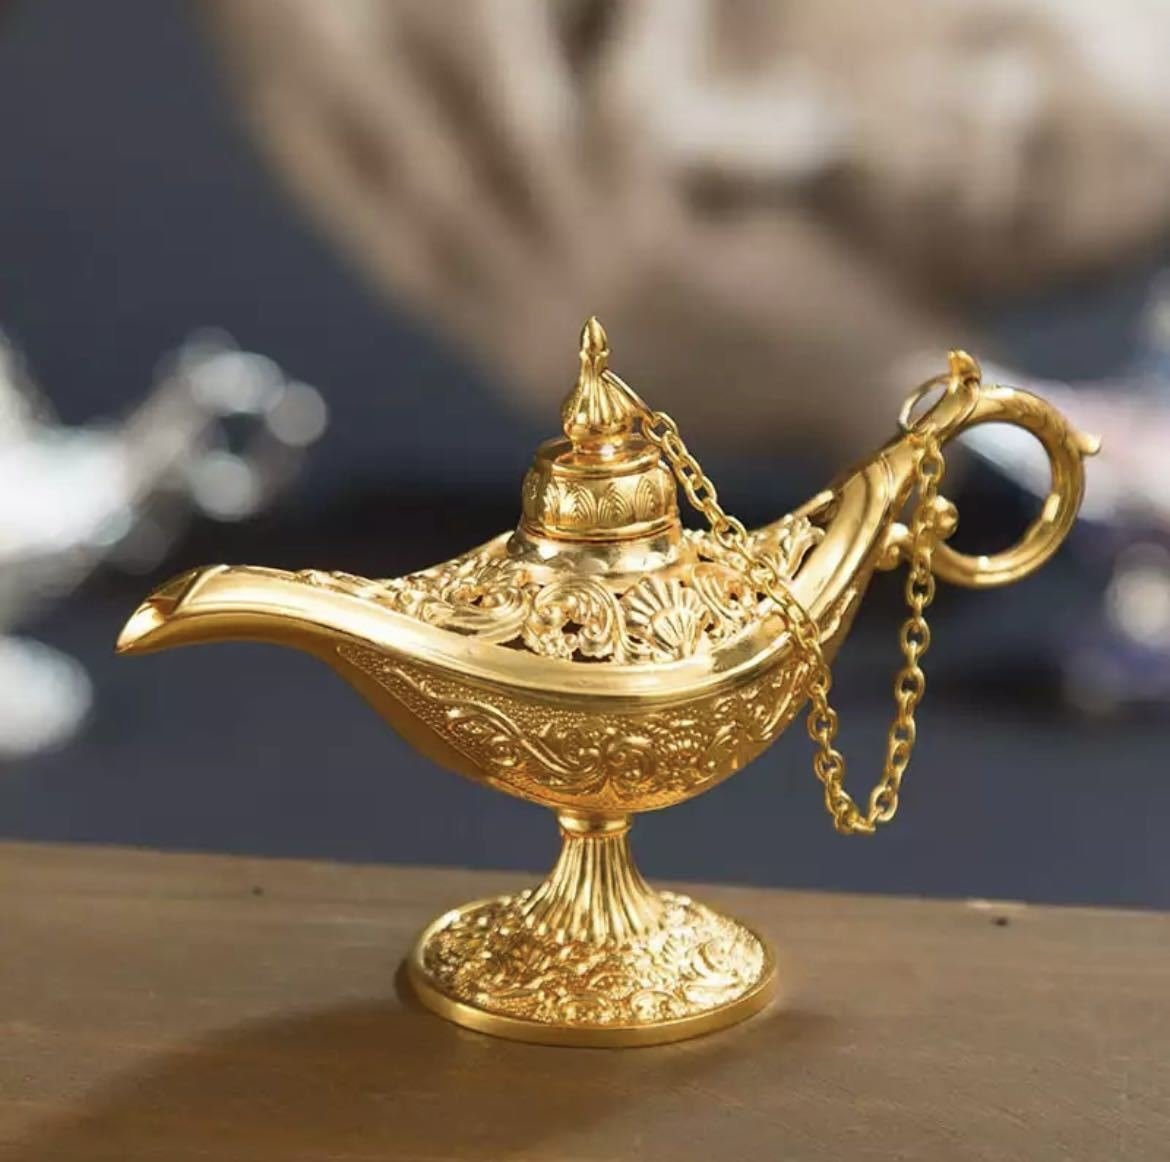 LHH603★All 4 types, 1 type selected Ornament, Accessory, Object, Decoration, Vintage, Accessory, Retro, Miscellaneous Goods, Magic Lamp-Style Ornament, Lamp, Interior, handmade works, interior, miscellaneous goods, ornament, object